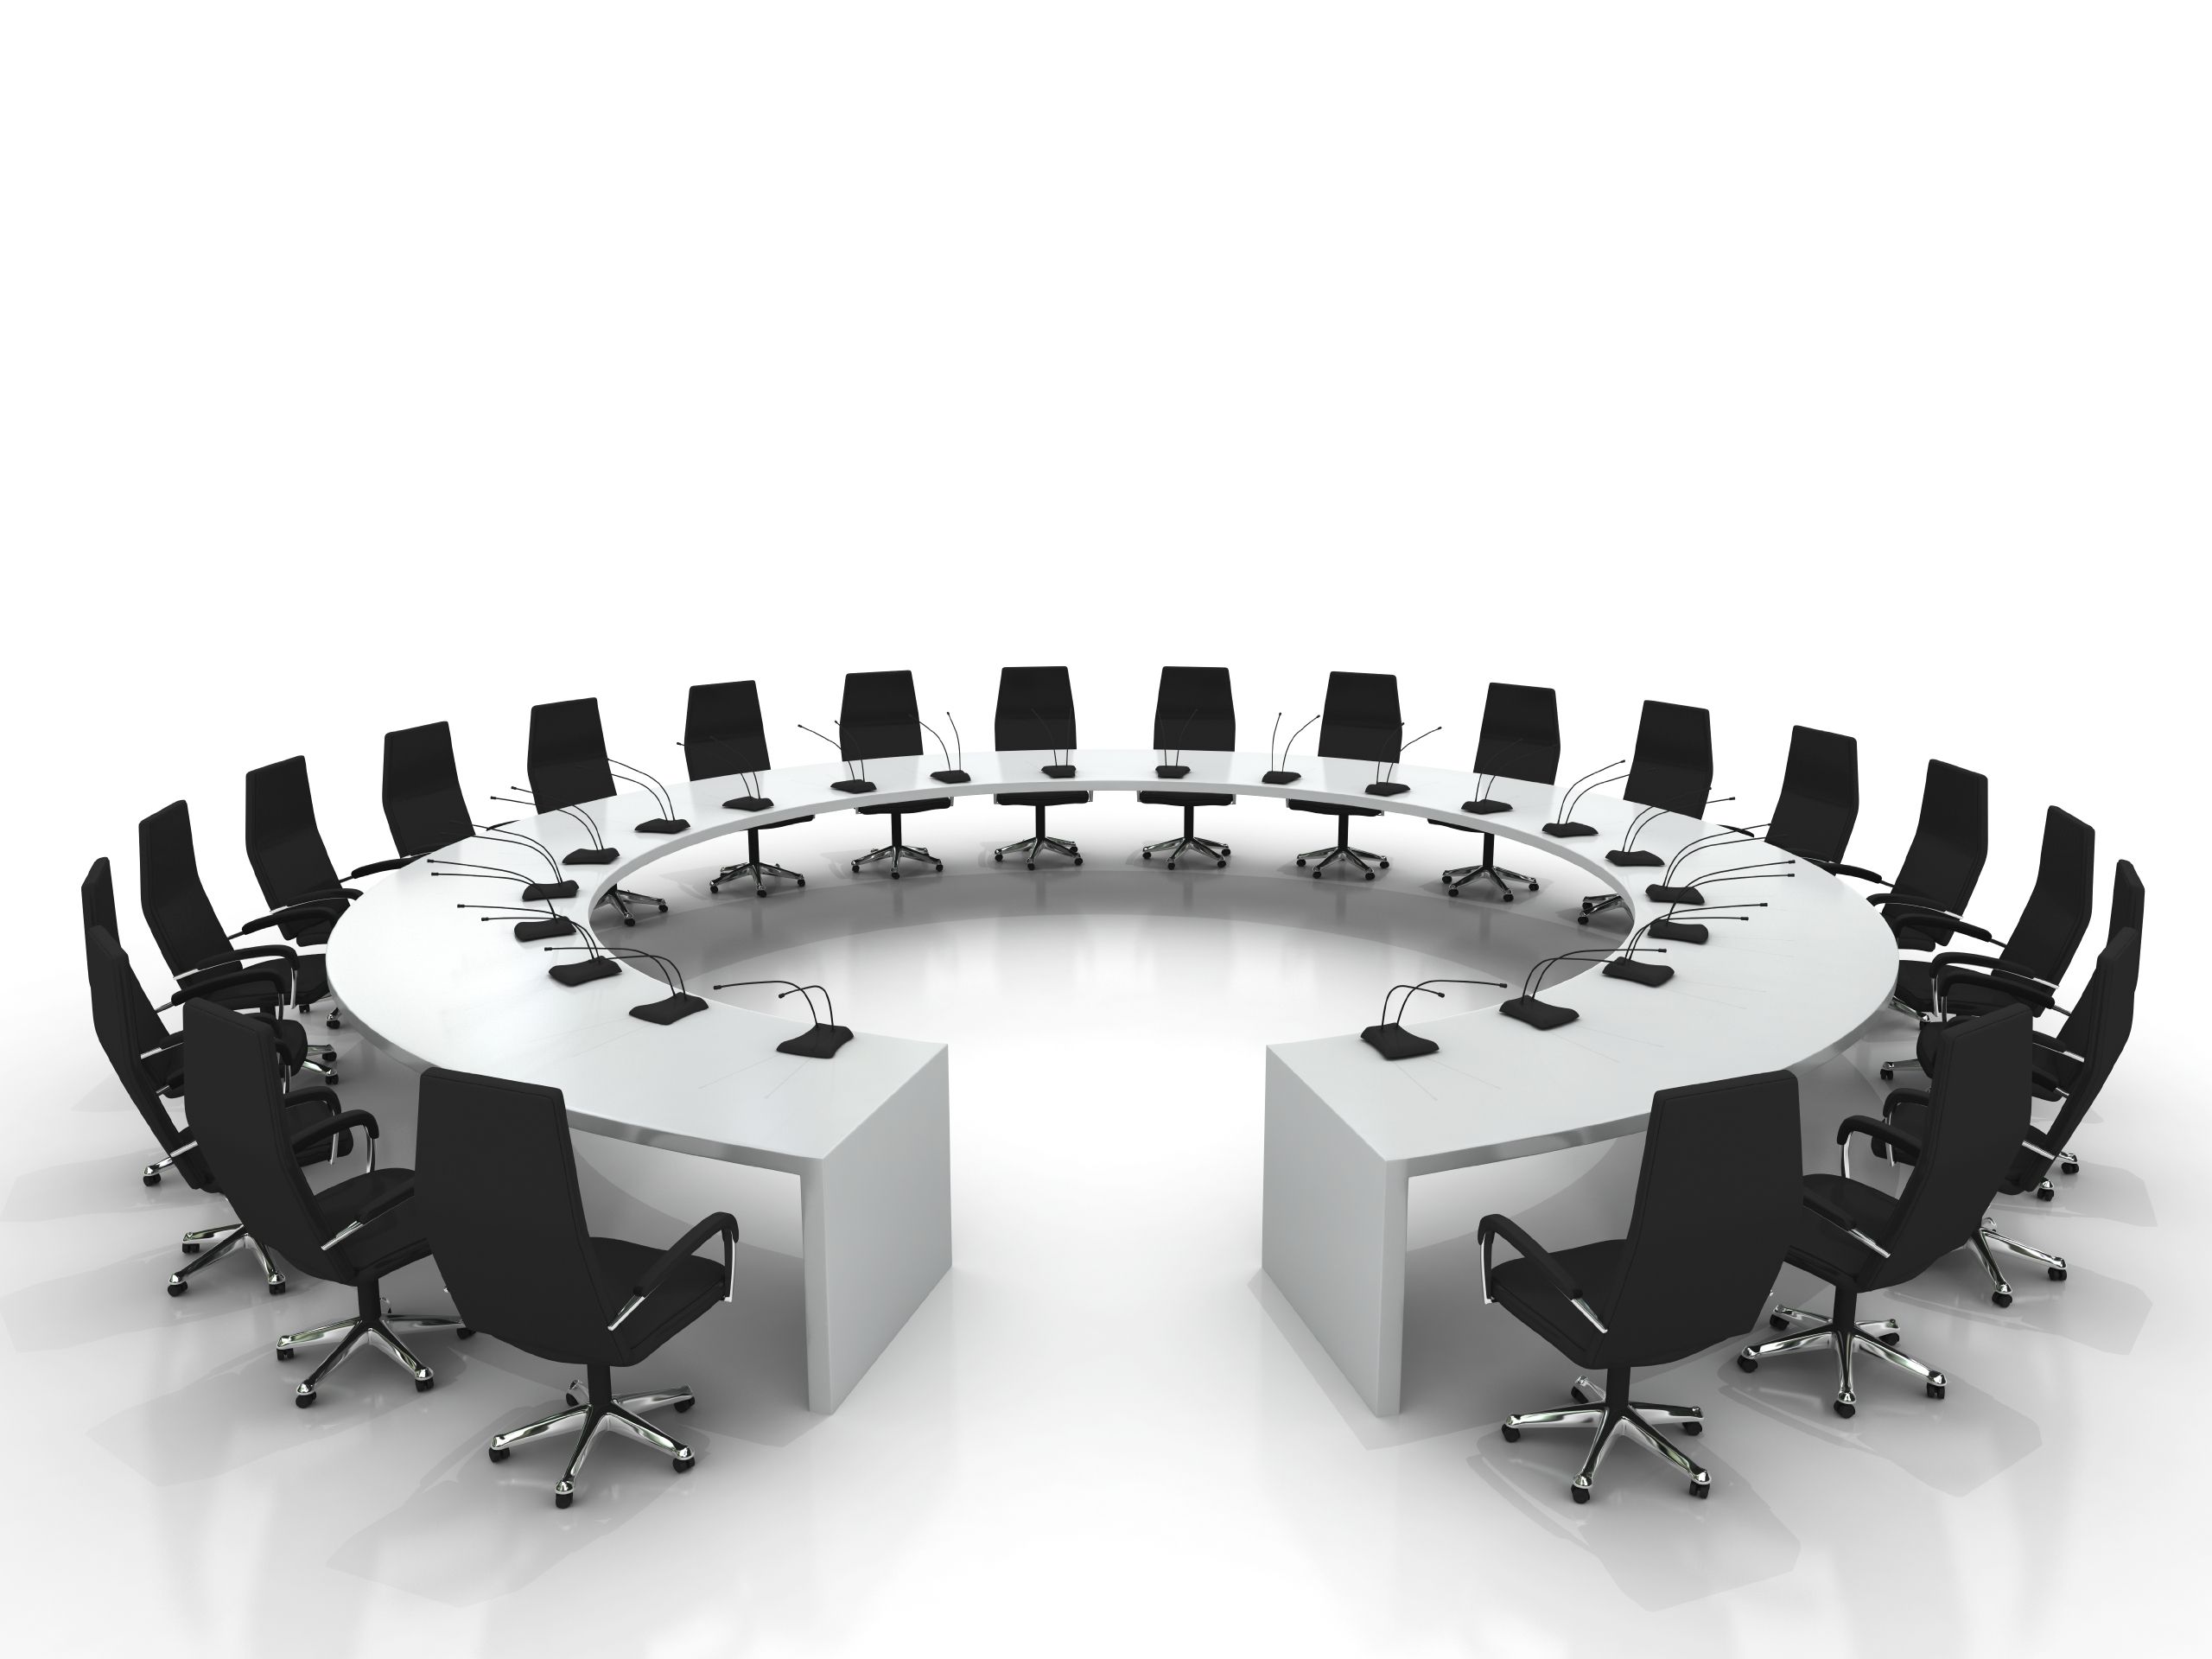 conference table and chairs